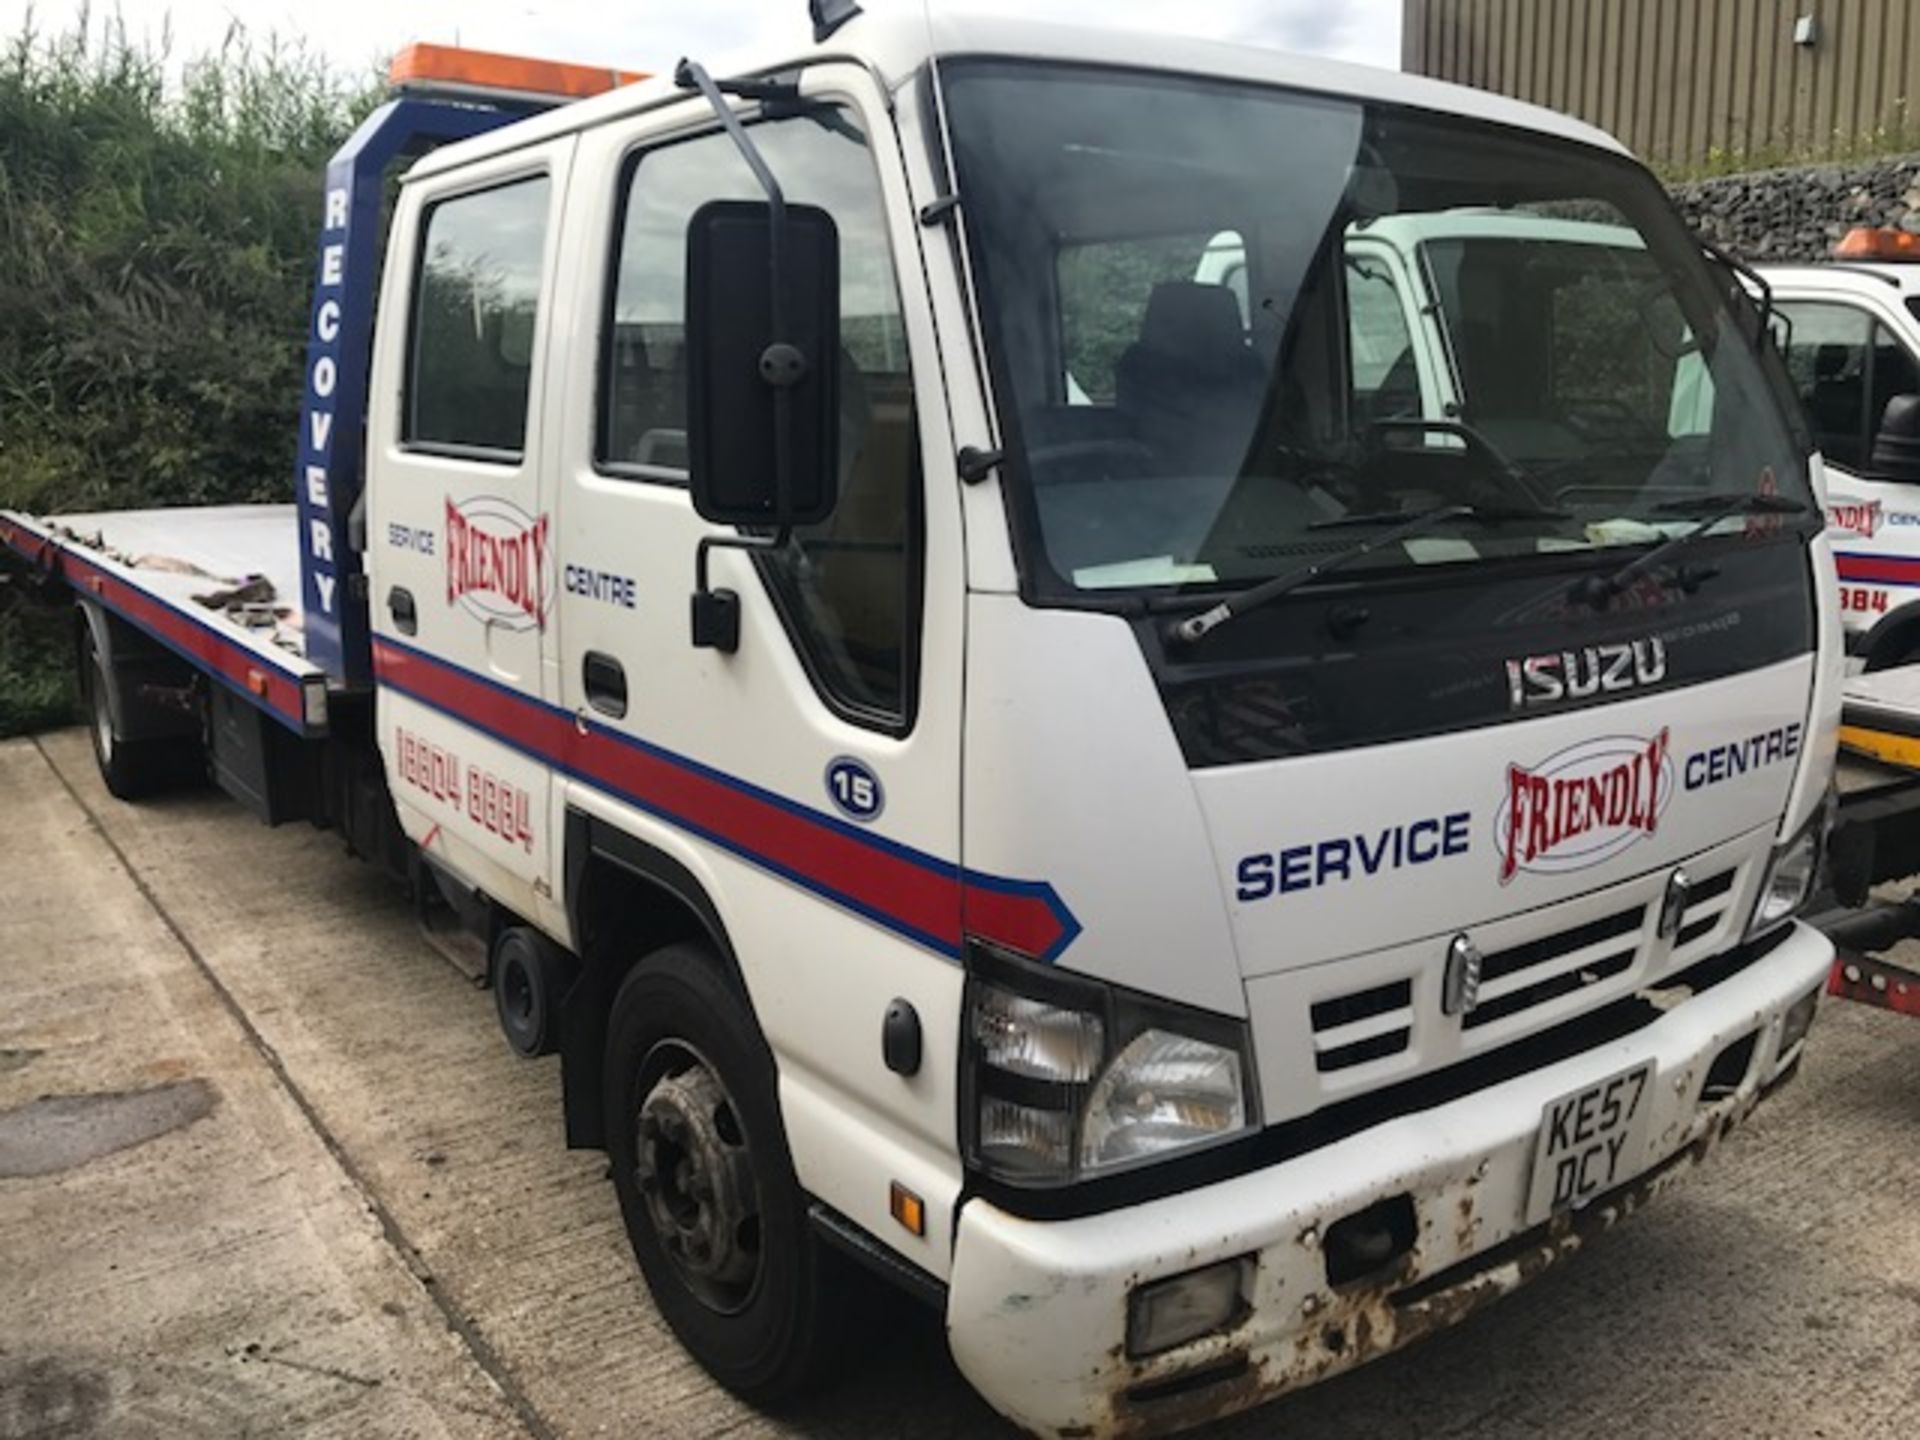 2007 Isuzu NQR 70 crew cab breakdown recovery vehicle complete with unbranded body, winch, built